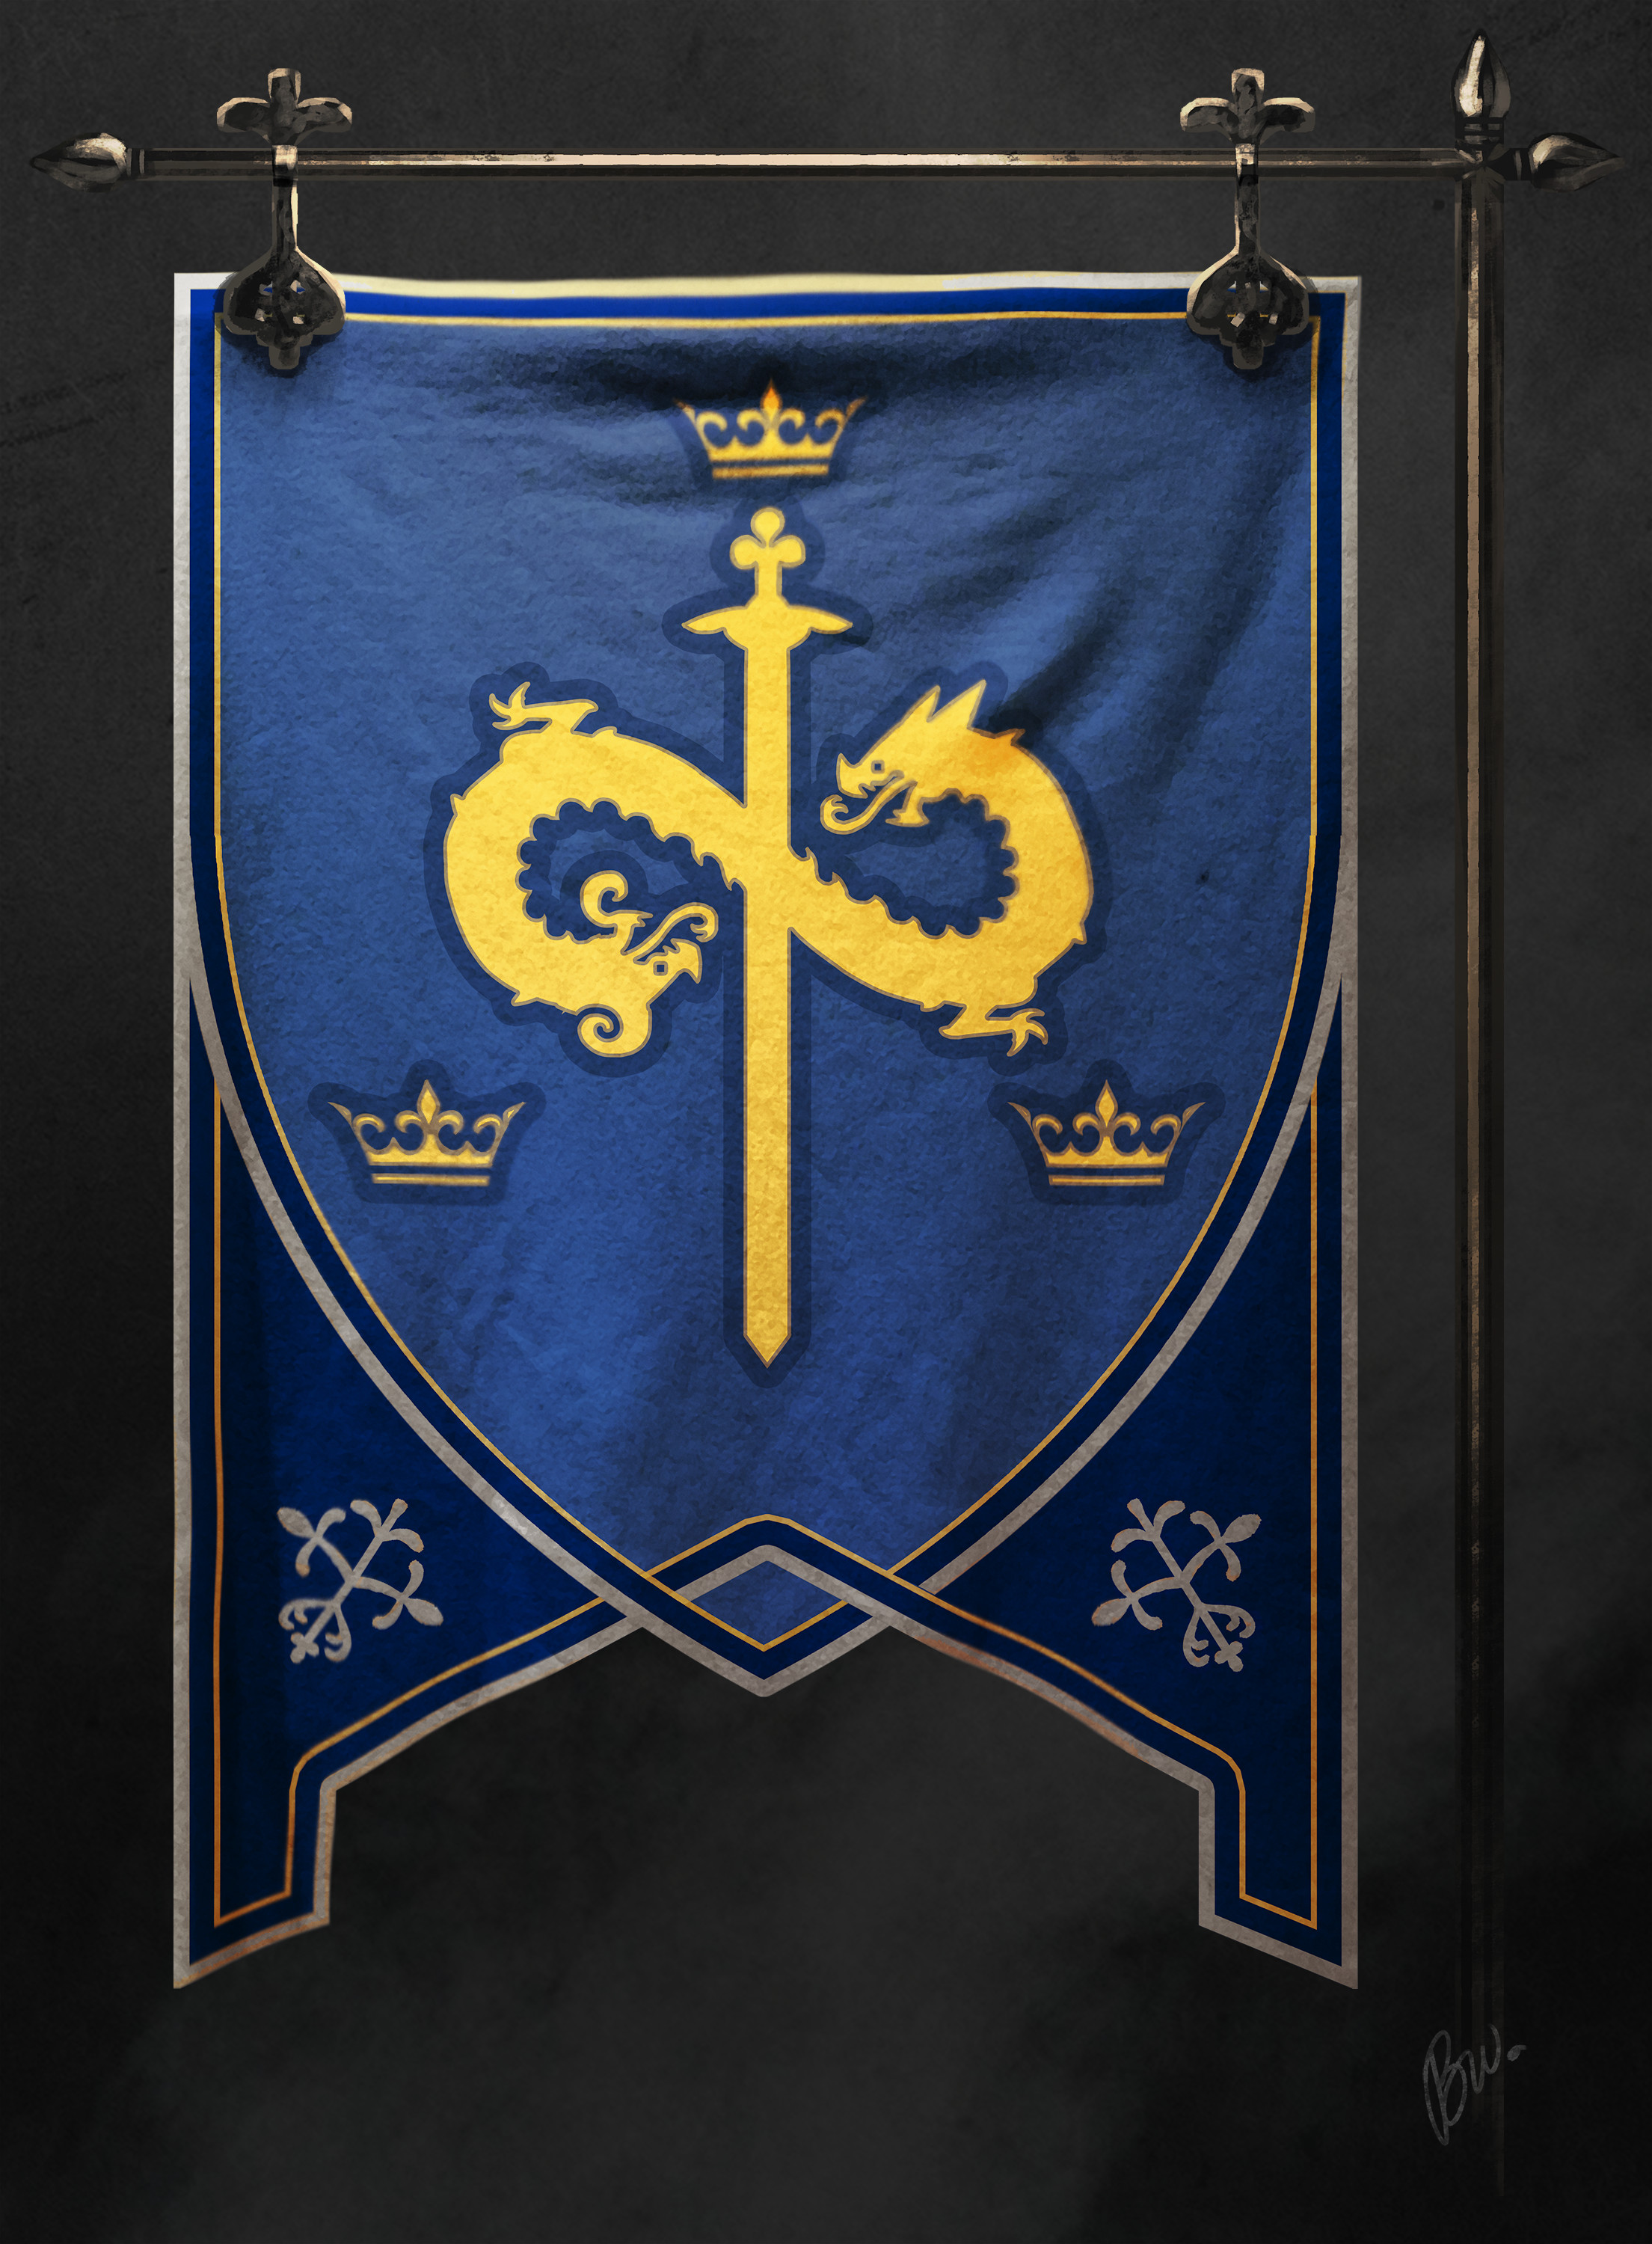 the dragons represent the Pendragon family in the form of an infinity logo (sort of) to represent the Once and Future King over the three kingdoms(crowns) and with excalibur in hand(the sword). 